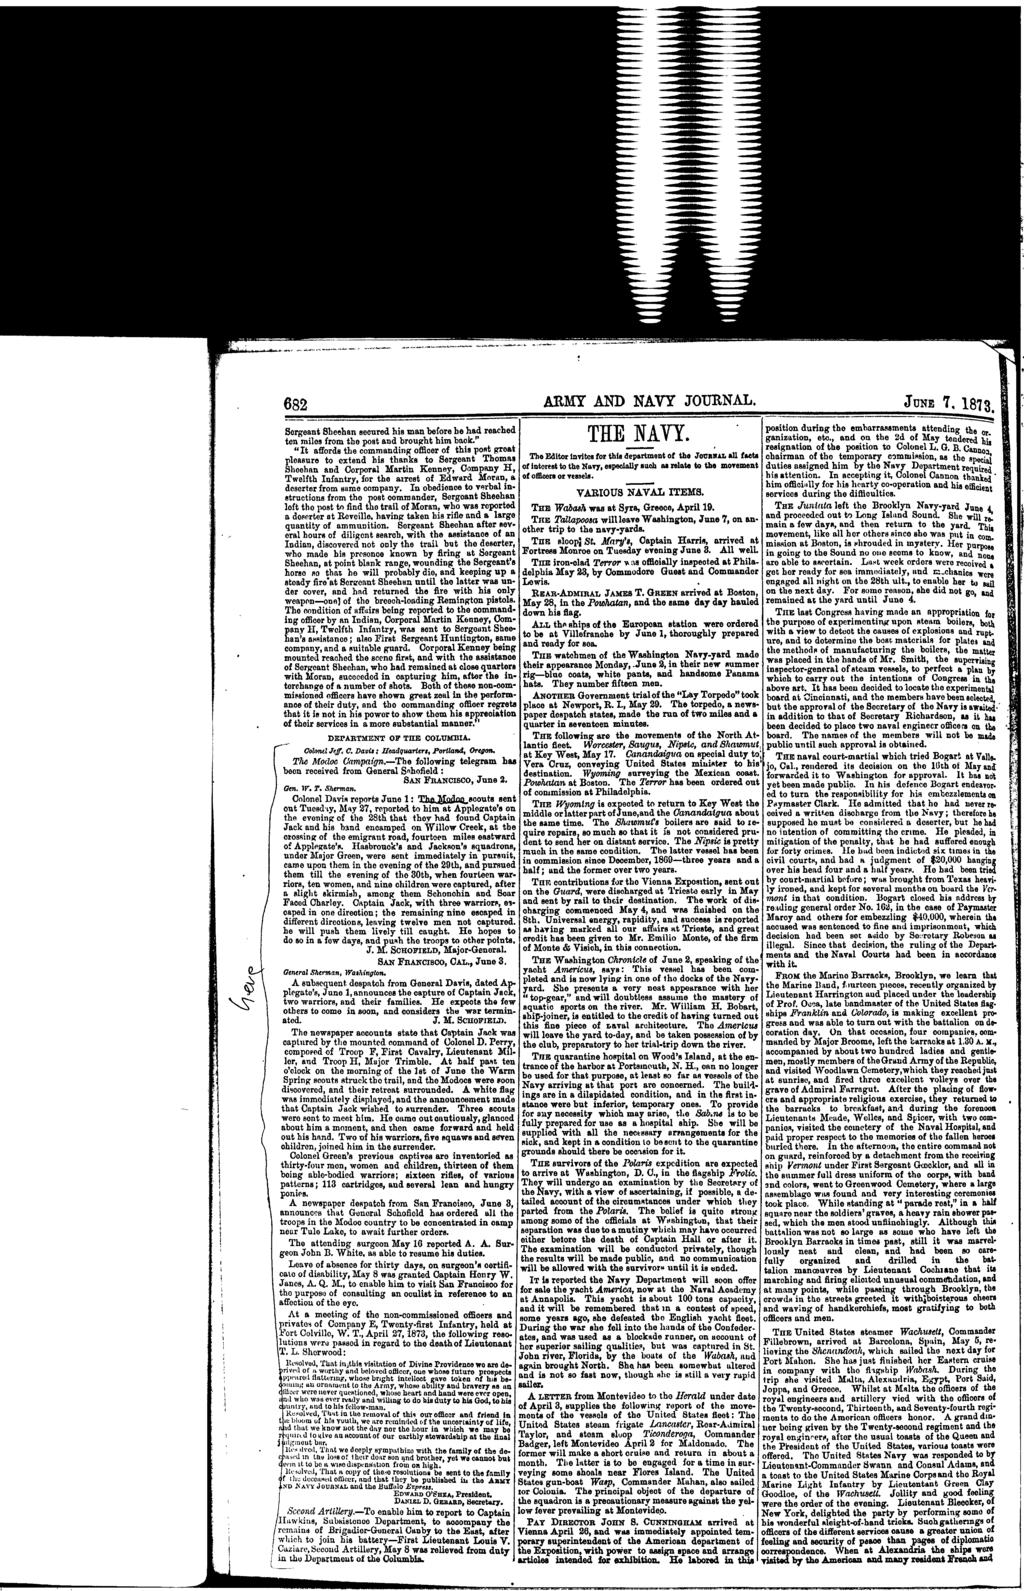 -- 682 ARMY AND NAVY JOURNAL. JUNE 7, 1873, Sergent Sheehn secured his mn bee be hd reched ten miles post brought him bok.